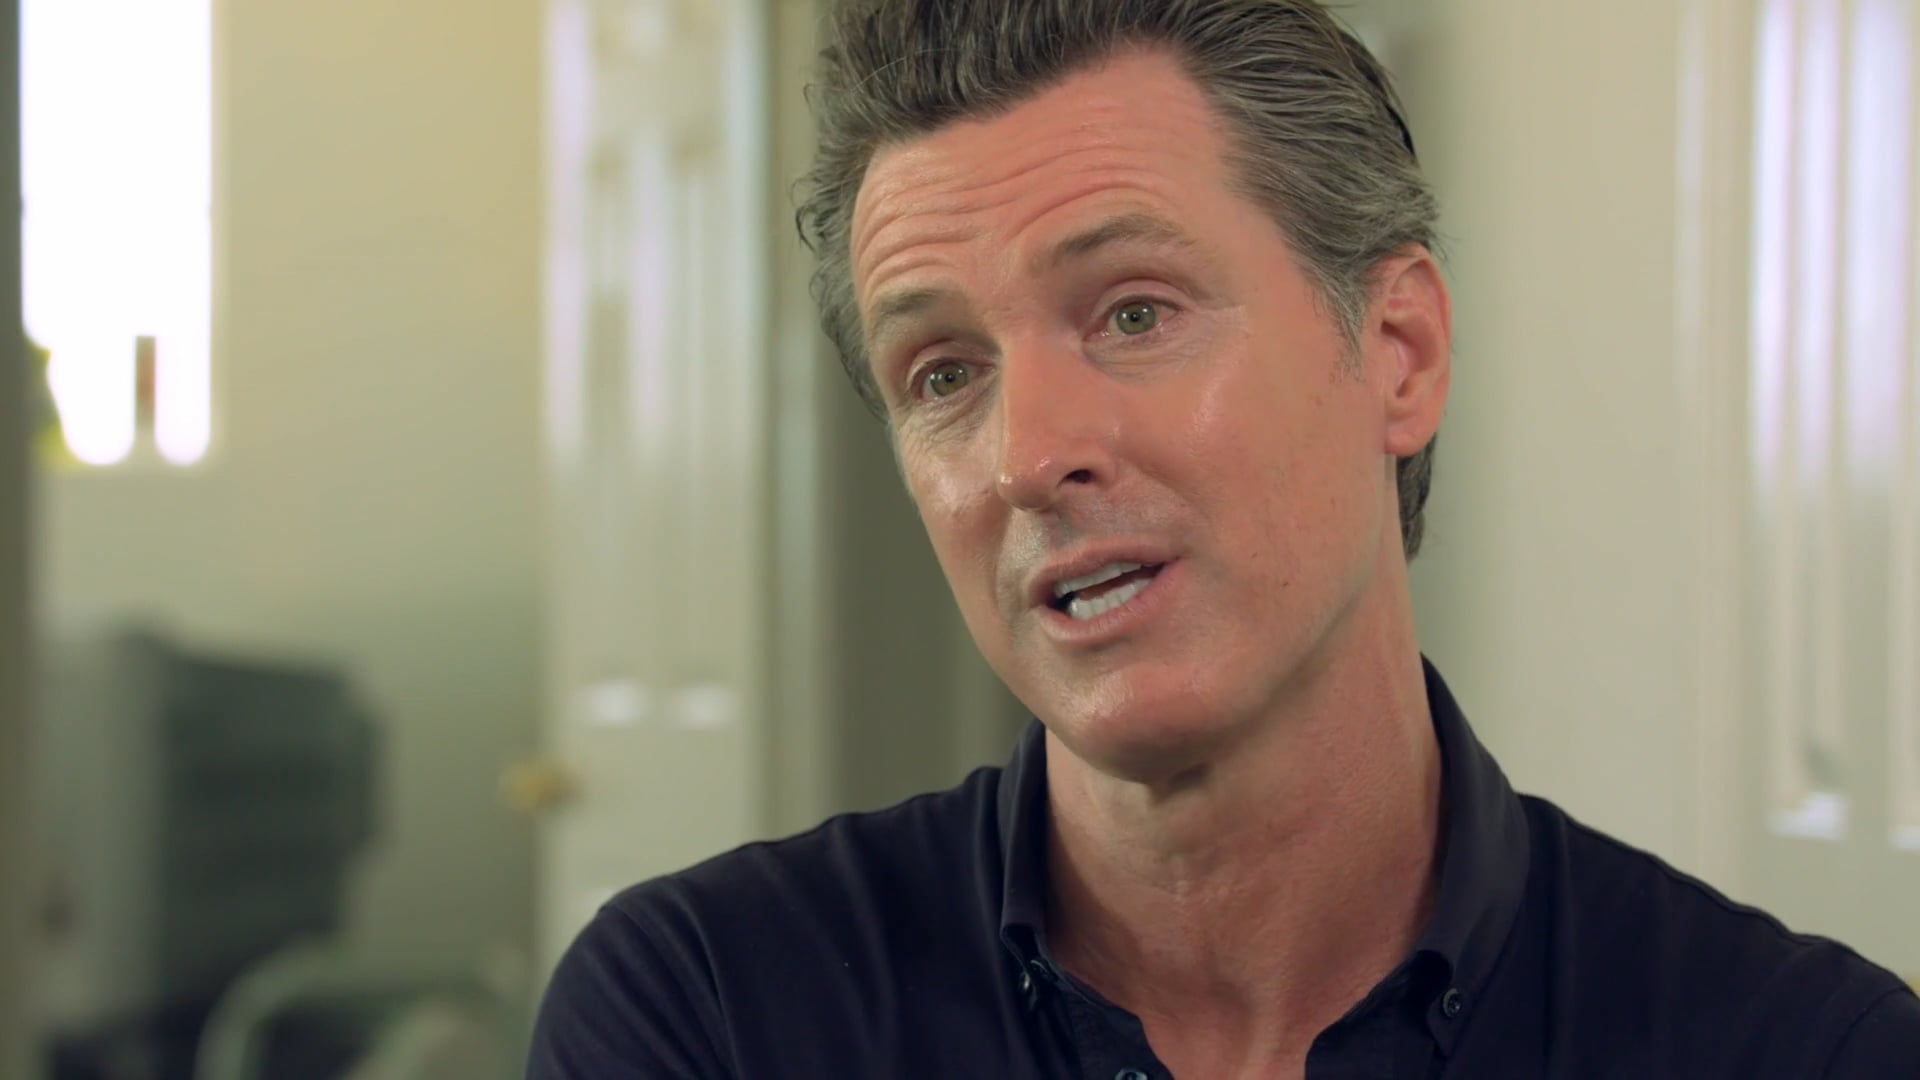 Gavin Newsom - Spend A Day In My Shoes